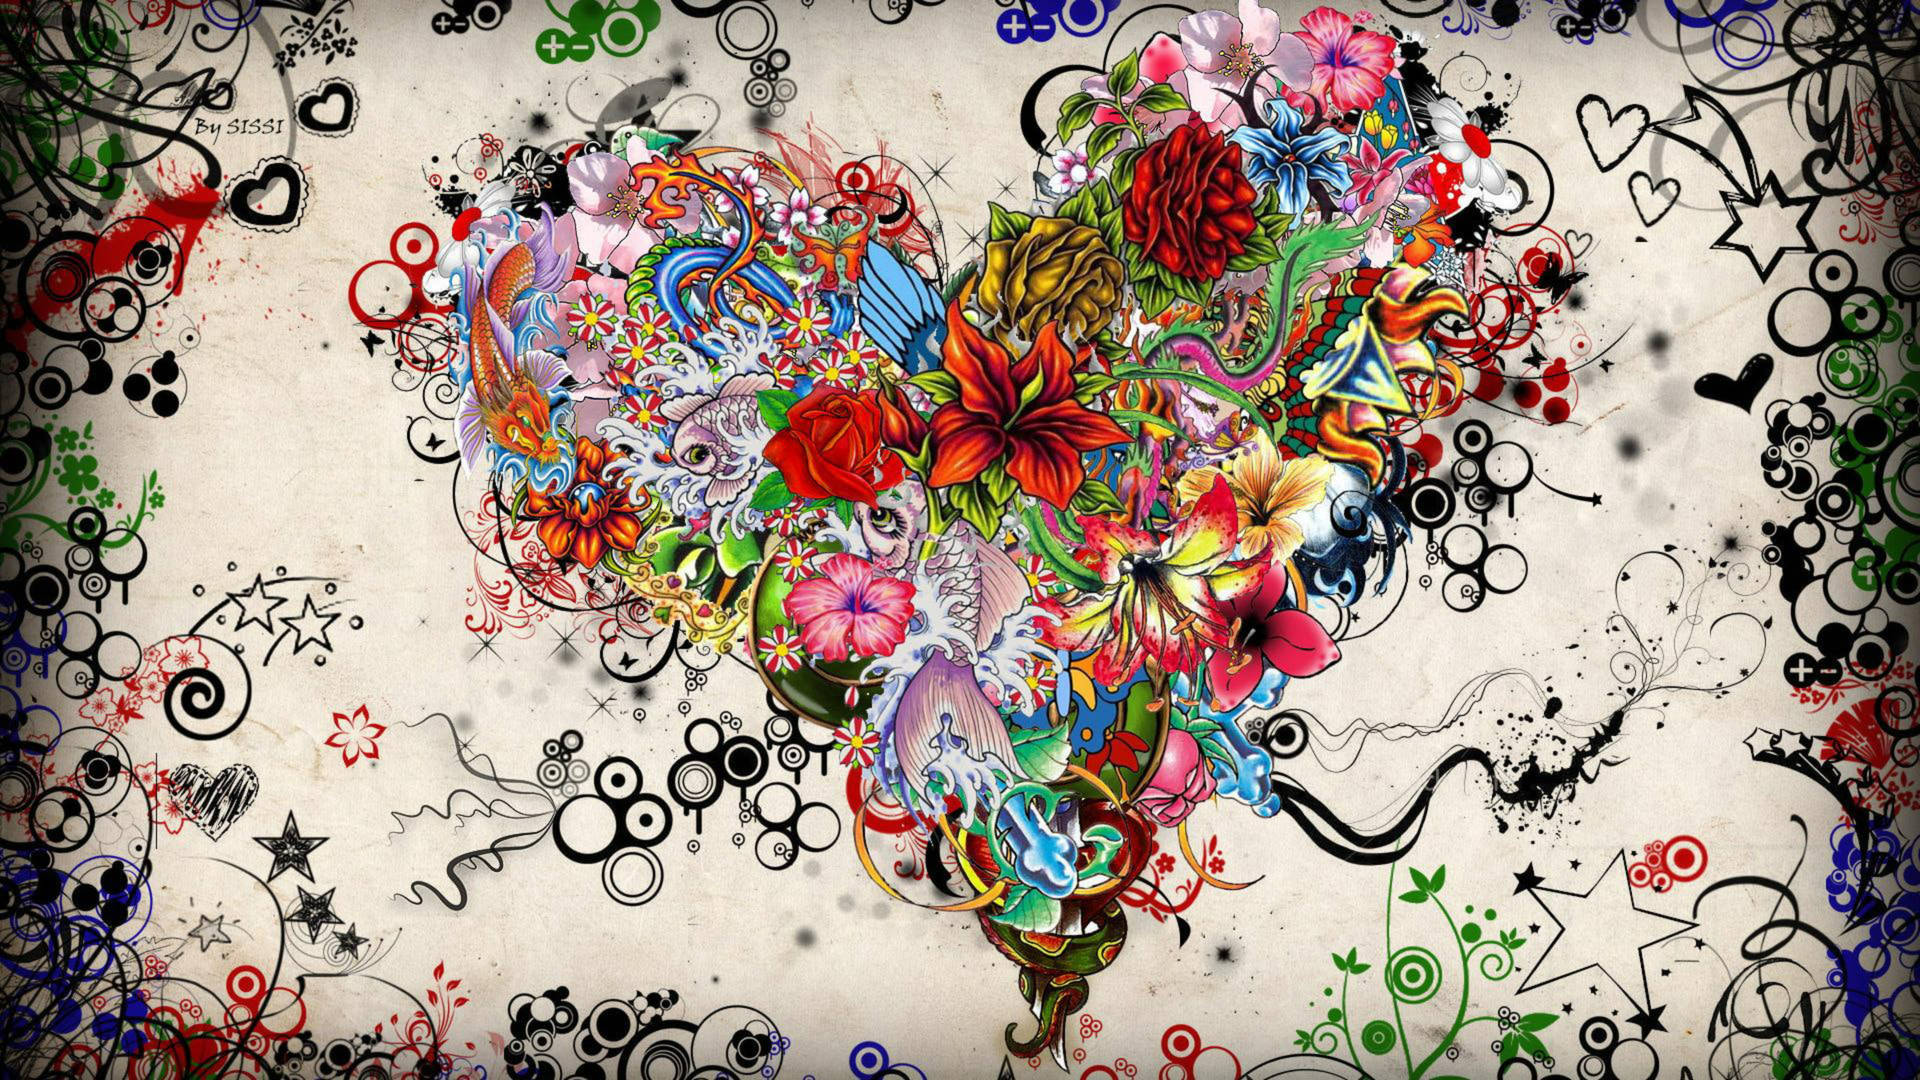 Heart-shaped Abstract Artwork Created In Canva